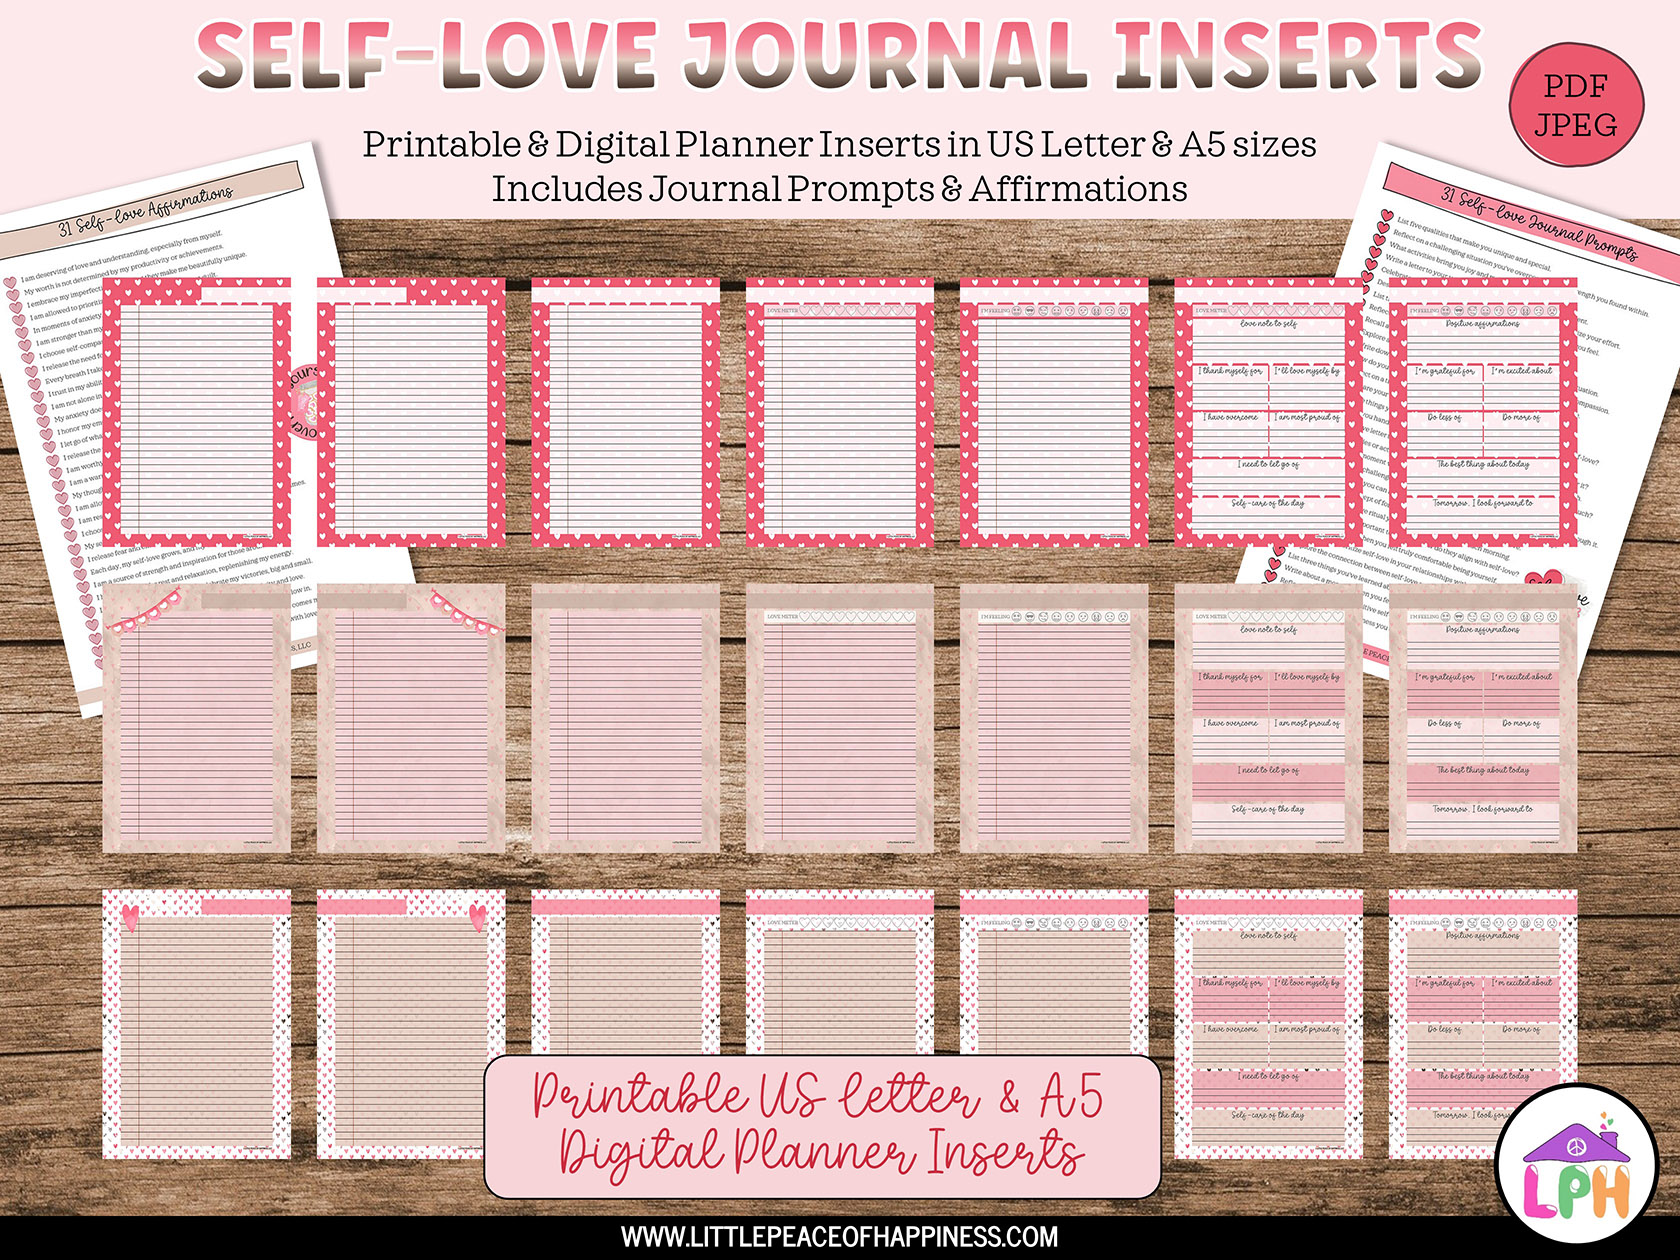 printable guided journal page templates to print at home and for digital use in digital journals and digital planners. Includes self love journal prompts and list of affirmations.